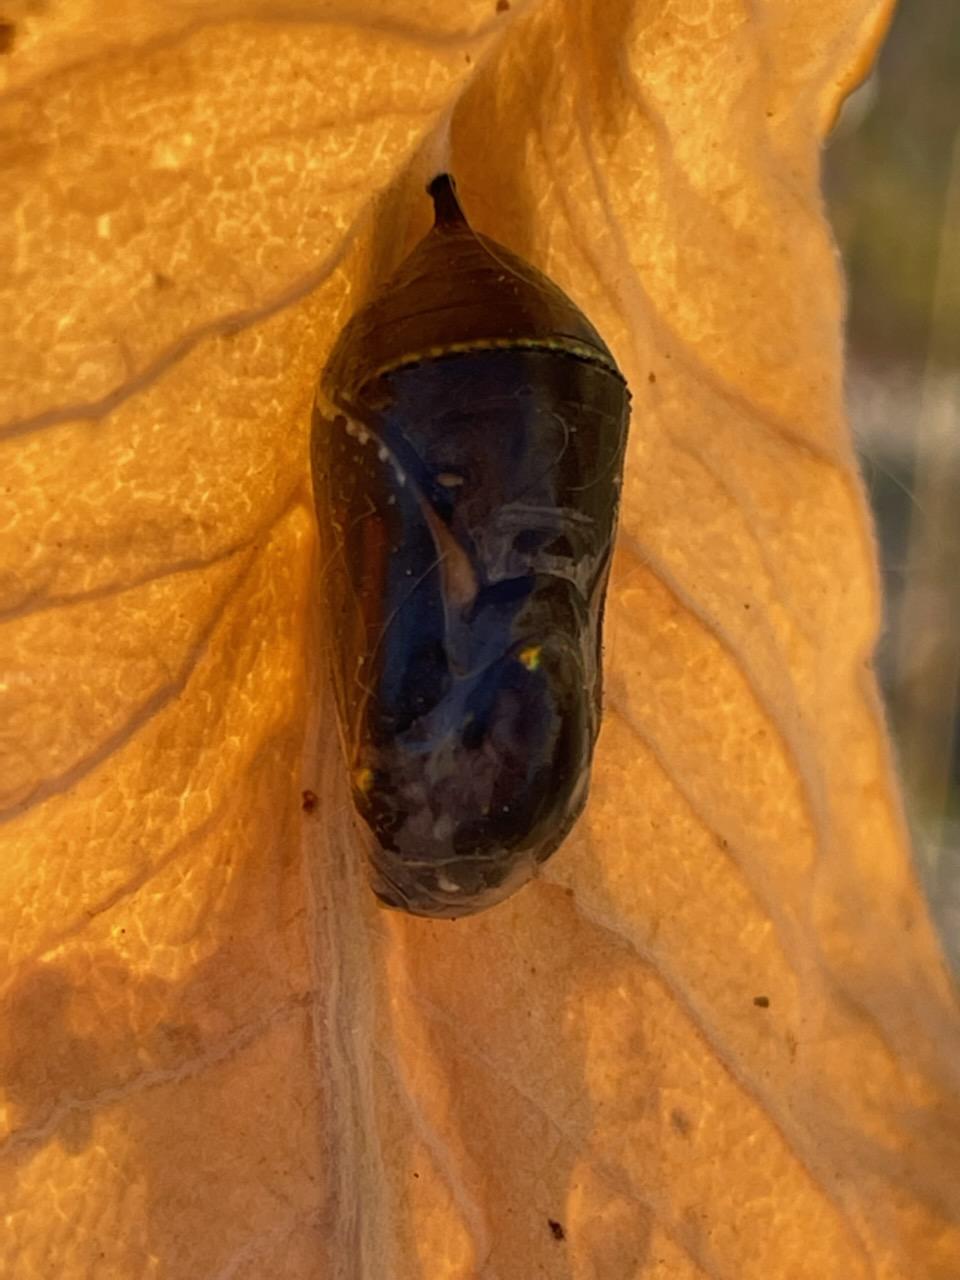 the chrysalis is all black, with no green. It still has some gold spots